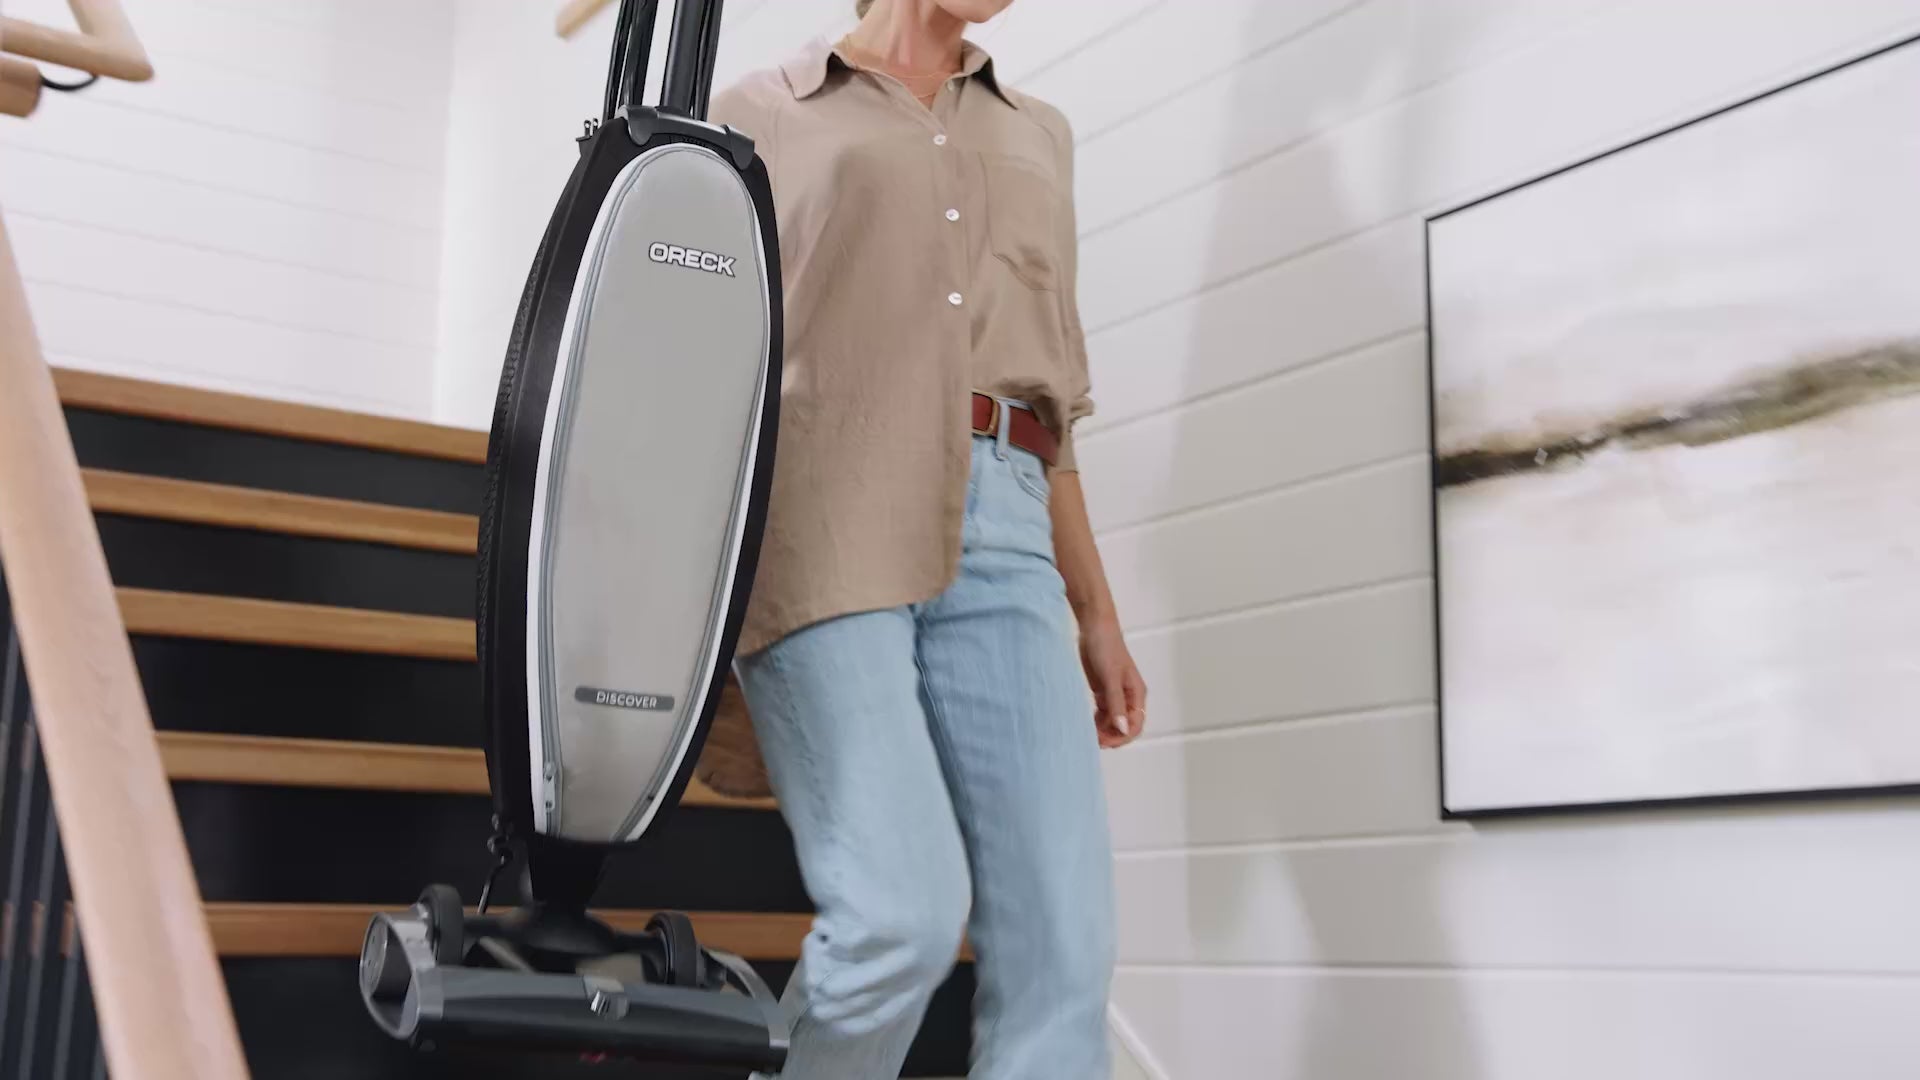 Oreck Discover Vacuum being showcased in a home setting